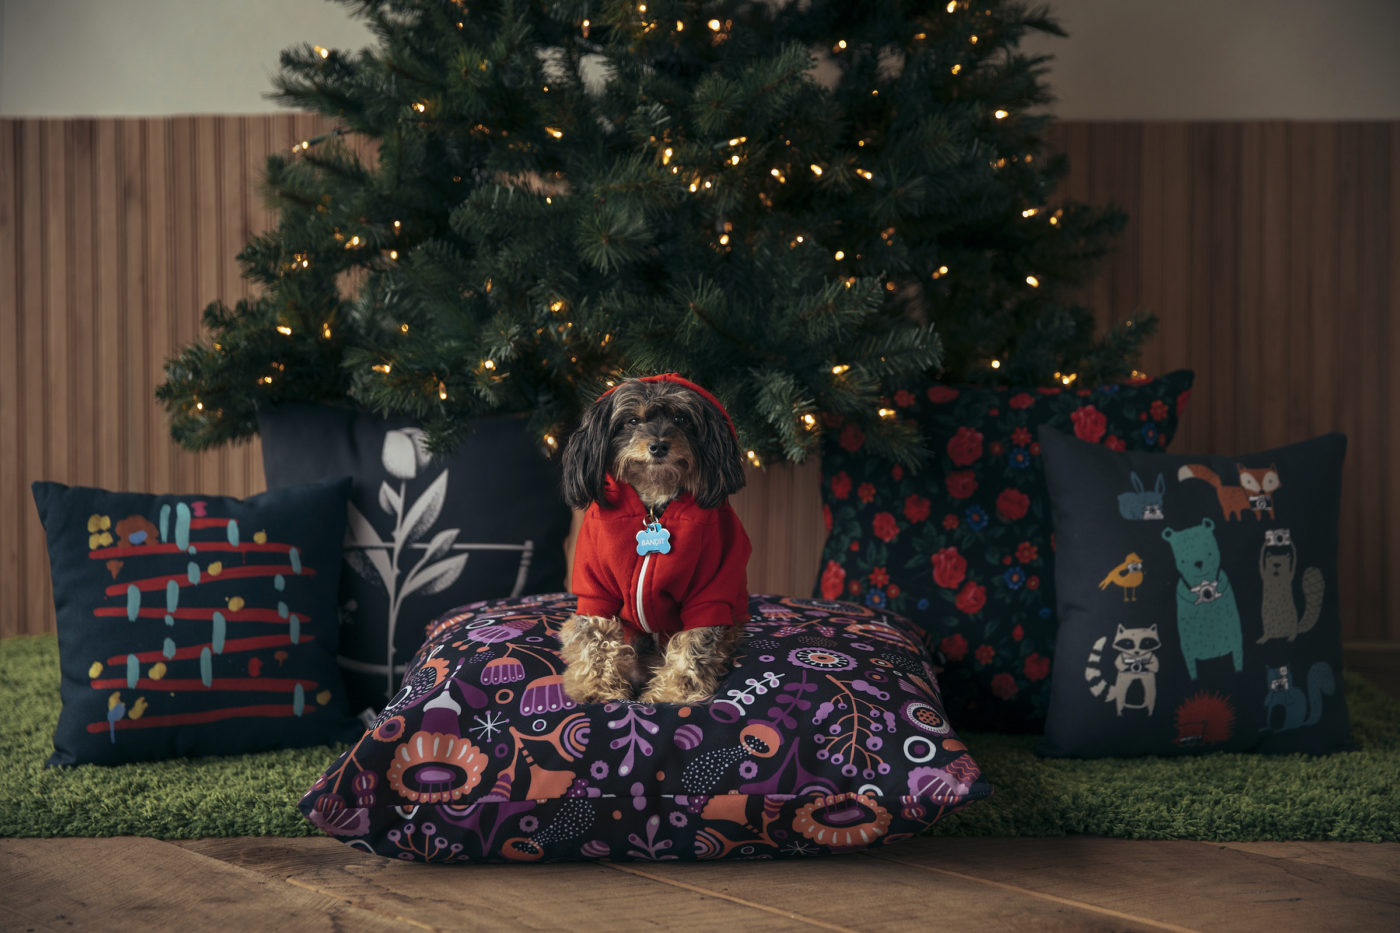 Make Your Lifestyle Photography Festive for the Holidays